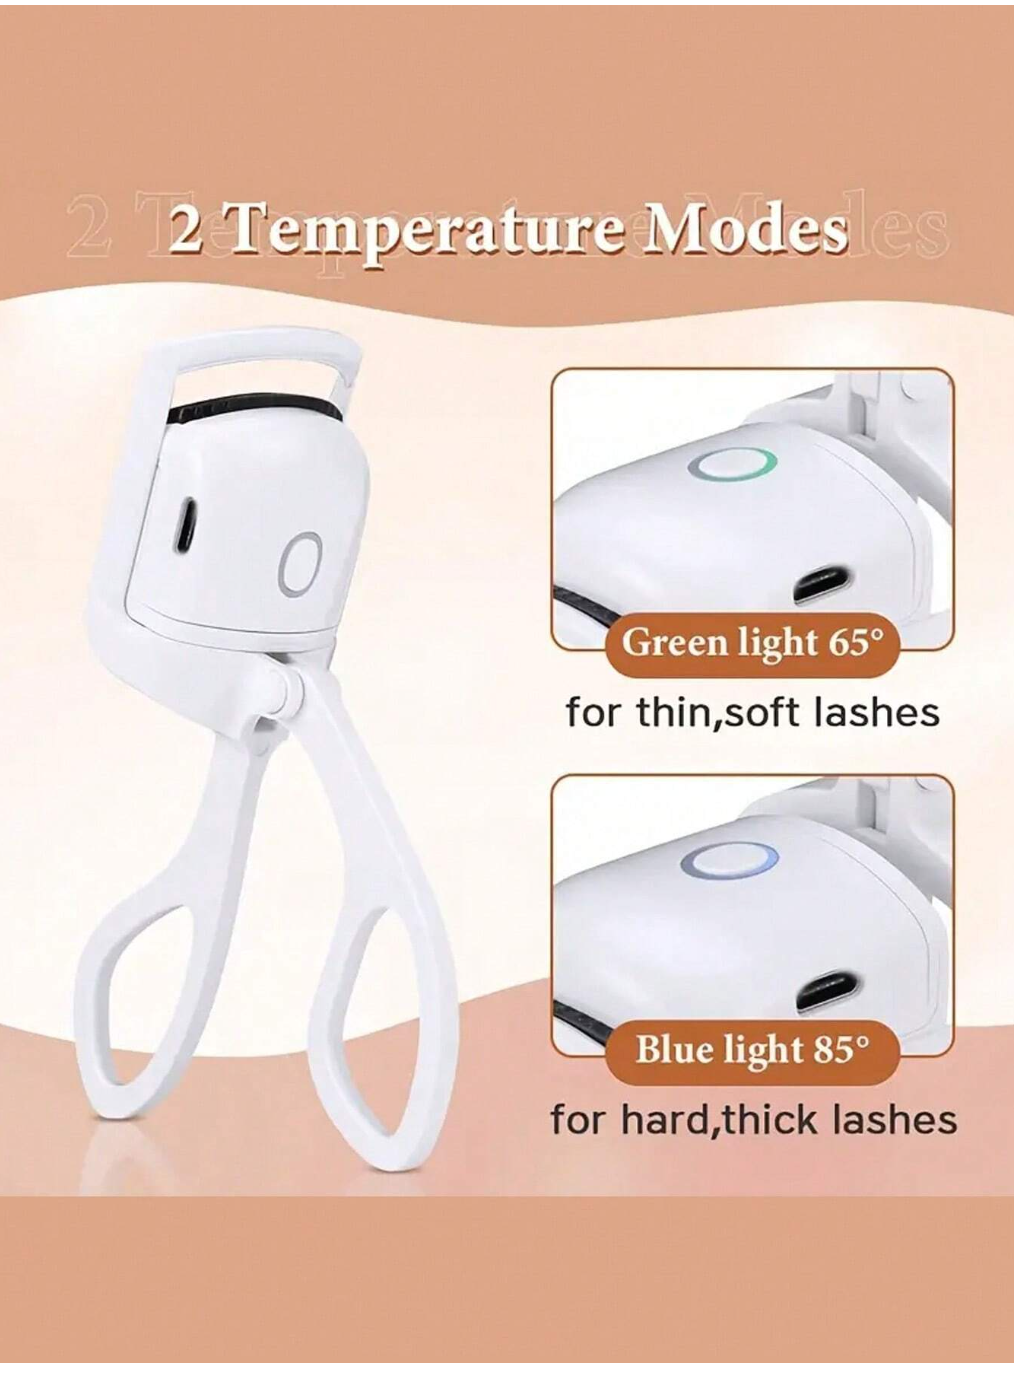 Glam in a Blink: 1pc Modern Beauty Electric Eyelash Curler - Long-Lasting Curl for Effortless Home Glamour!